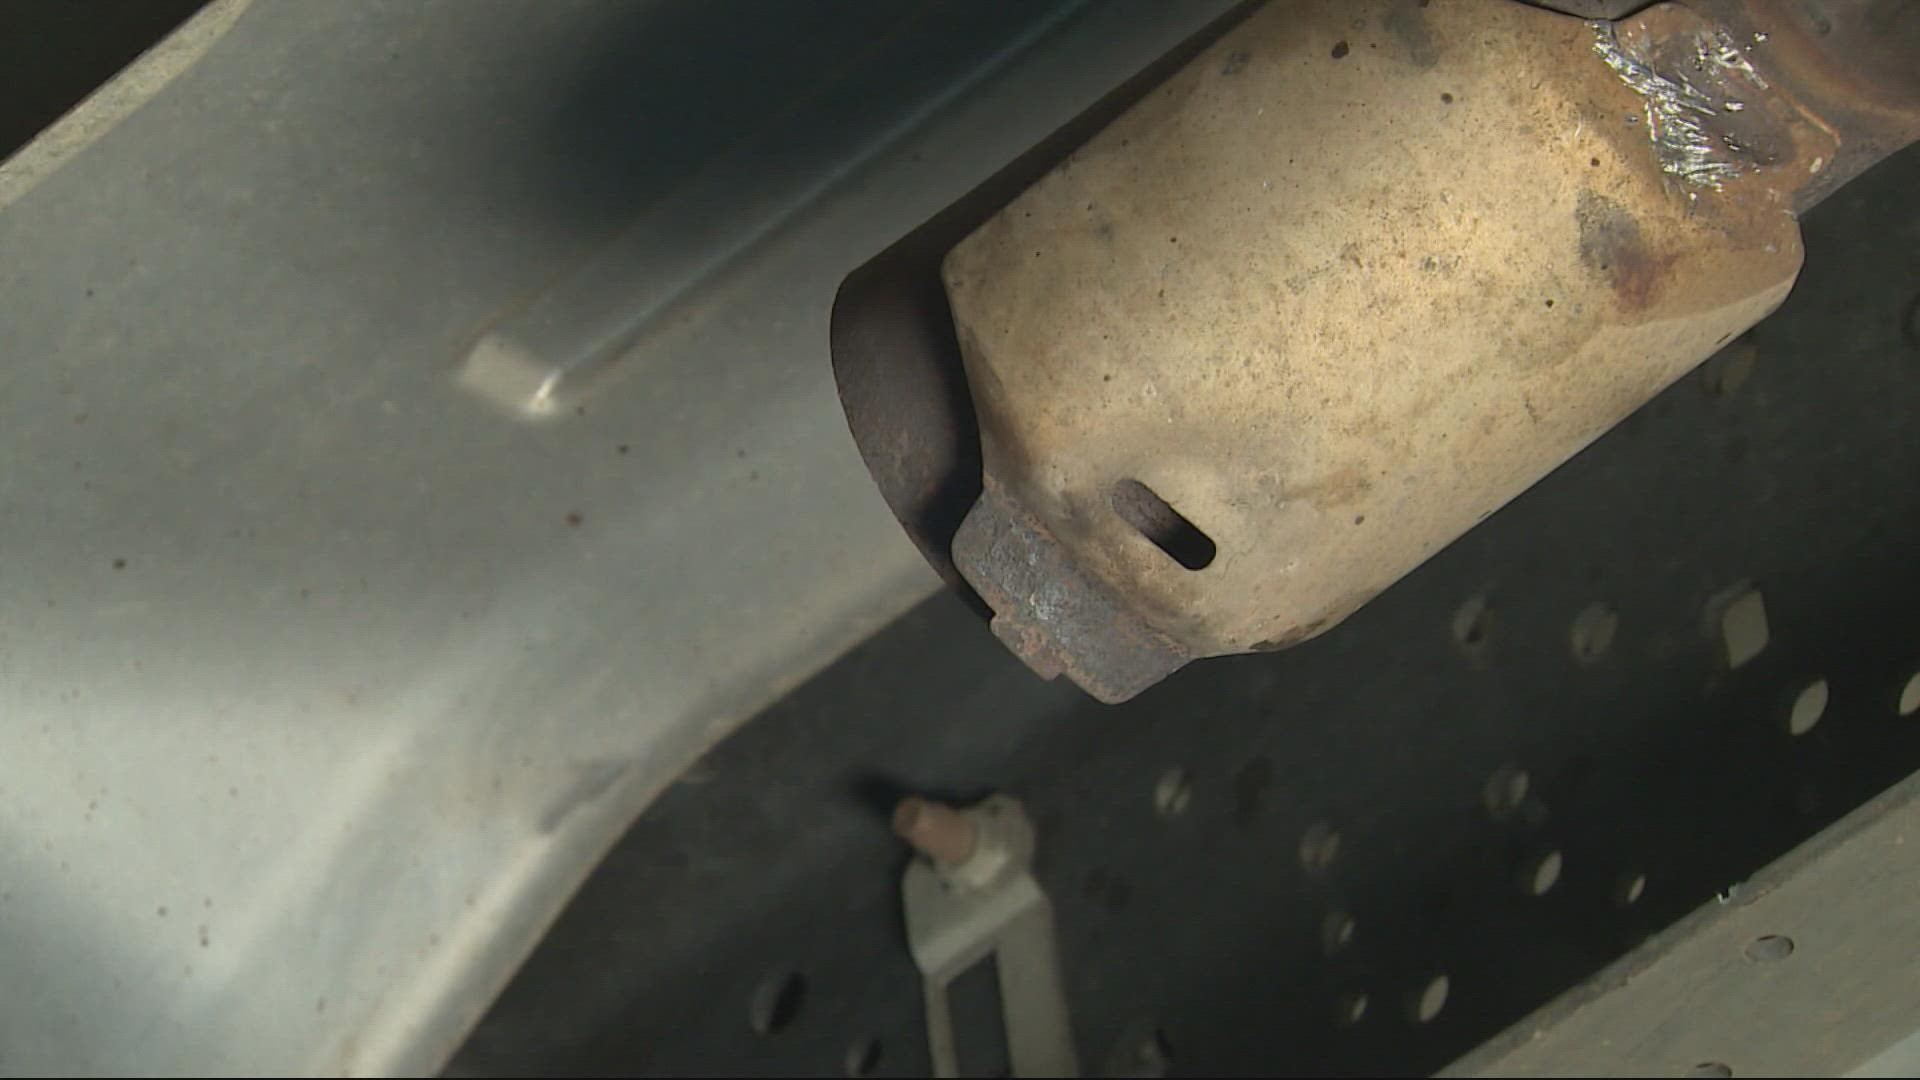 Washington saw a nearly 4,000% increase of catalytic converter thefts from 2019-2020. KGW's Devon Haskins explains how lawmakers are trying to tackle the problem.